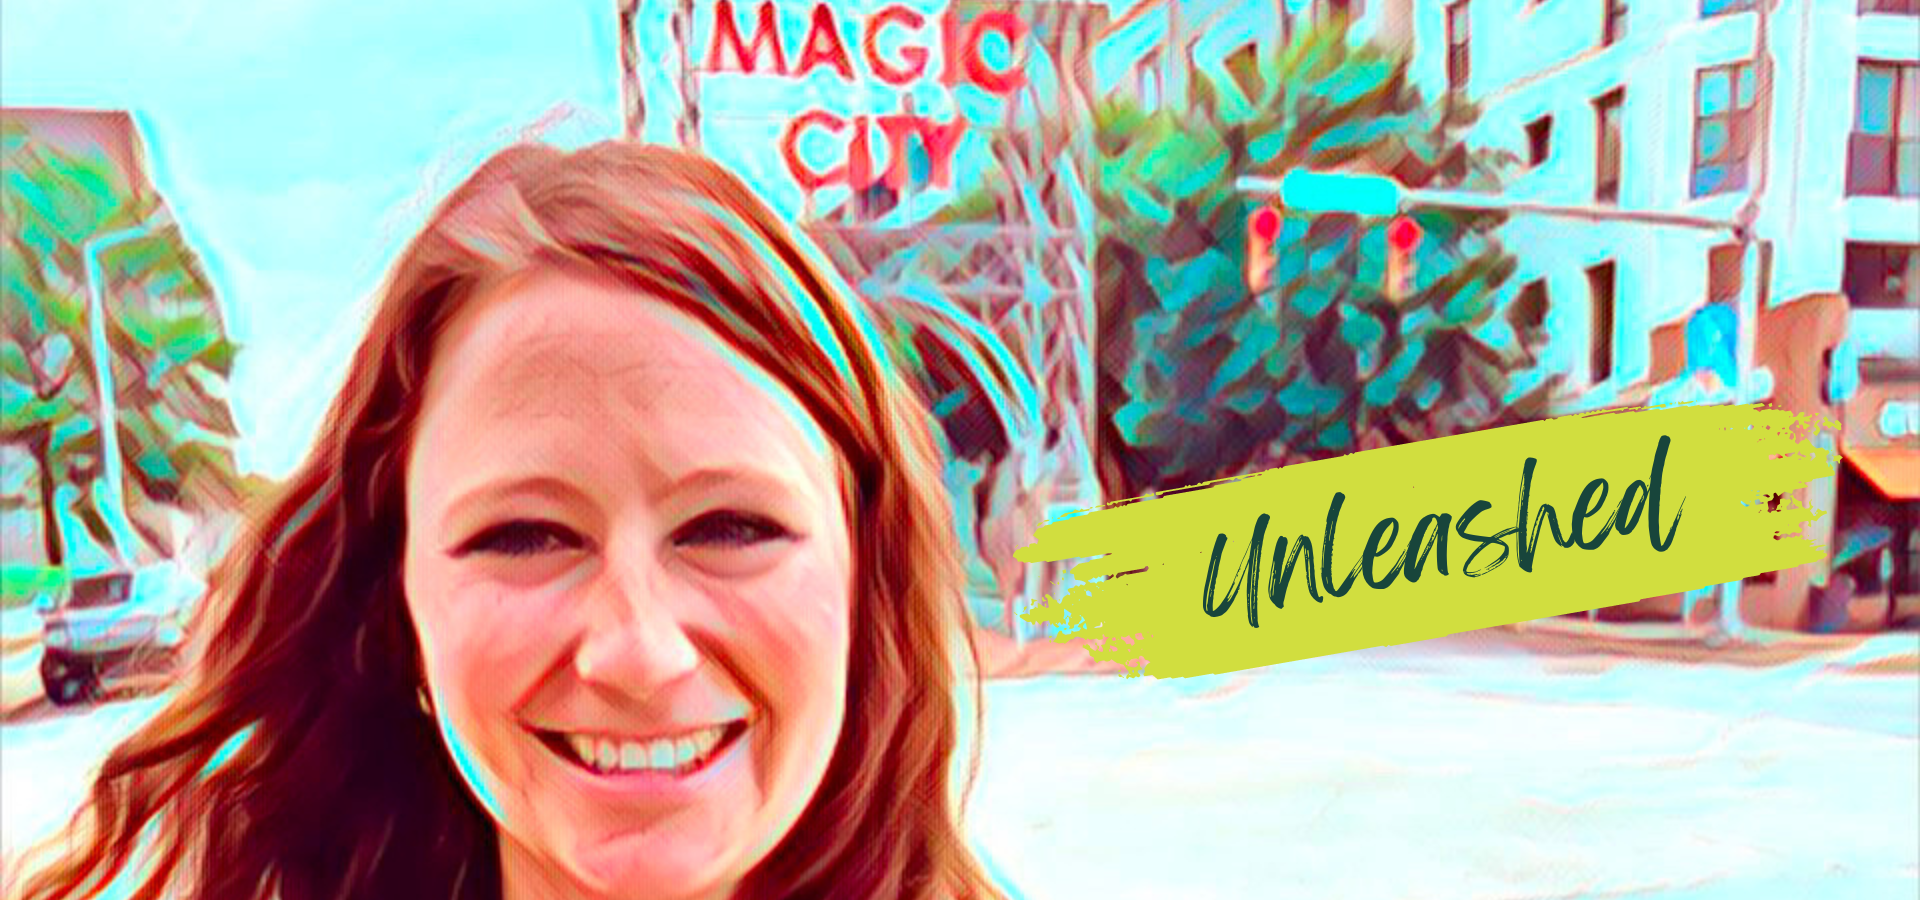 Cailtin Moore, standing in front of "Magic City" sign.